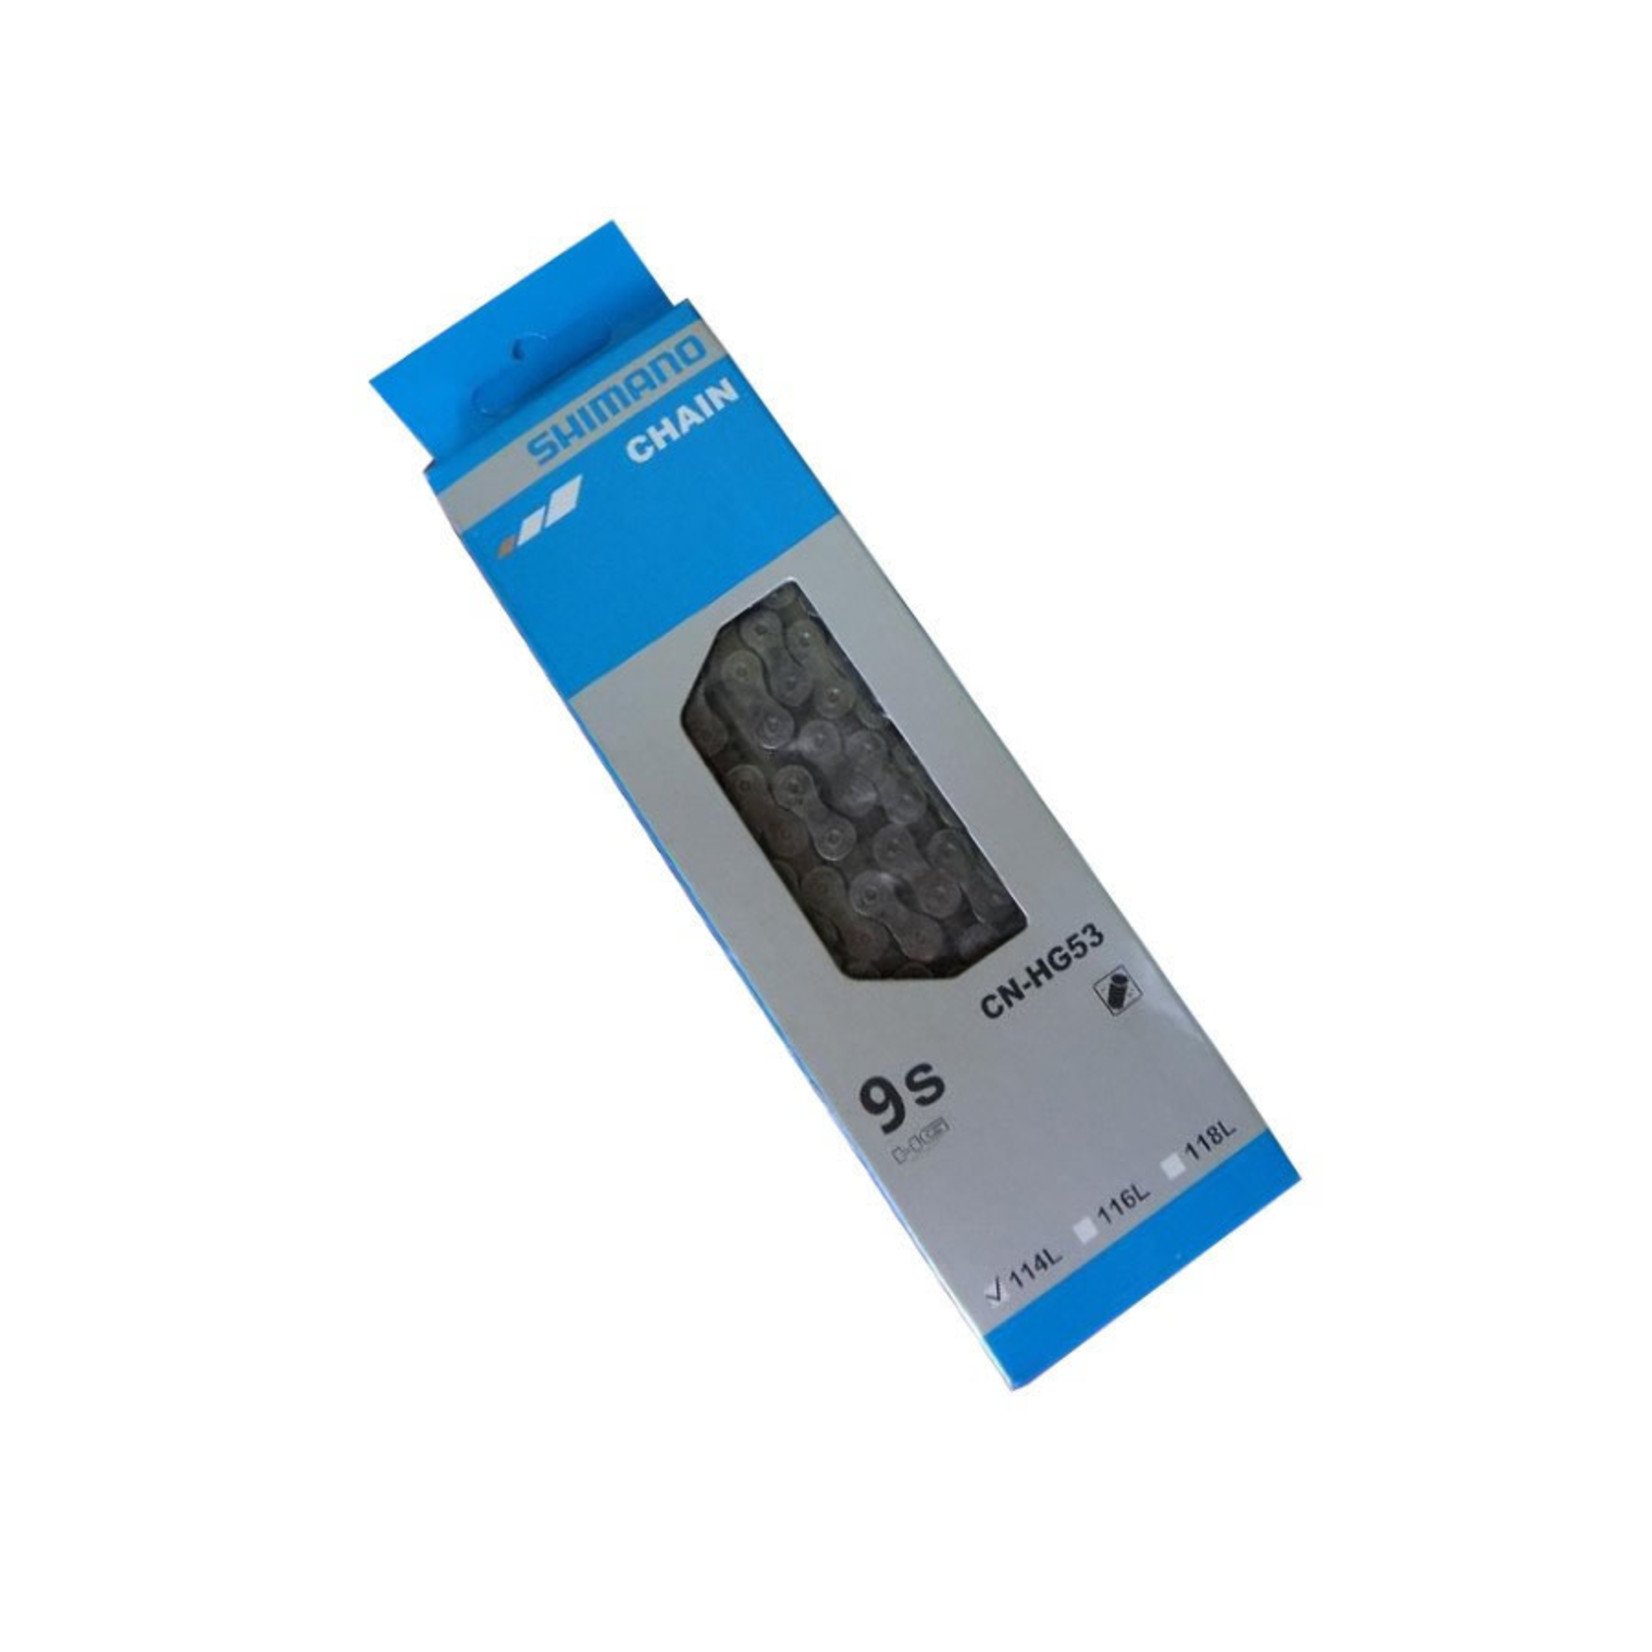 Shimano CHAIN, CN-HG53 SUPER NARROW CHAIN FOR 9-SPEED SPECIAL RIVET, W/O END PIN, W/AMPOULE TYPE CONNECT PIN (1), 116LINKS, IND.PACK